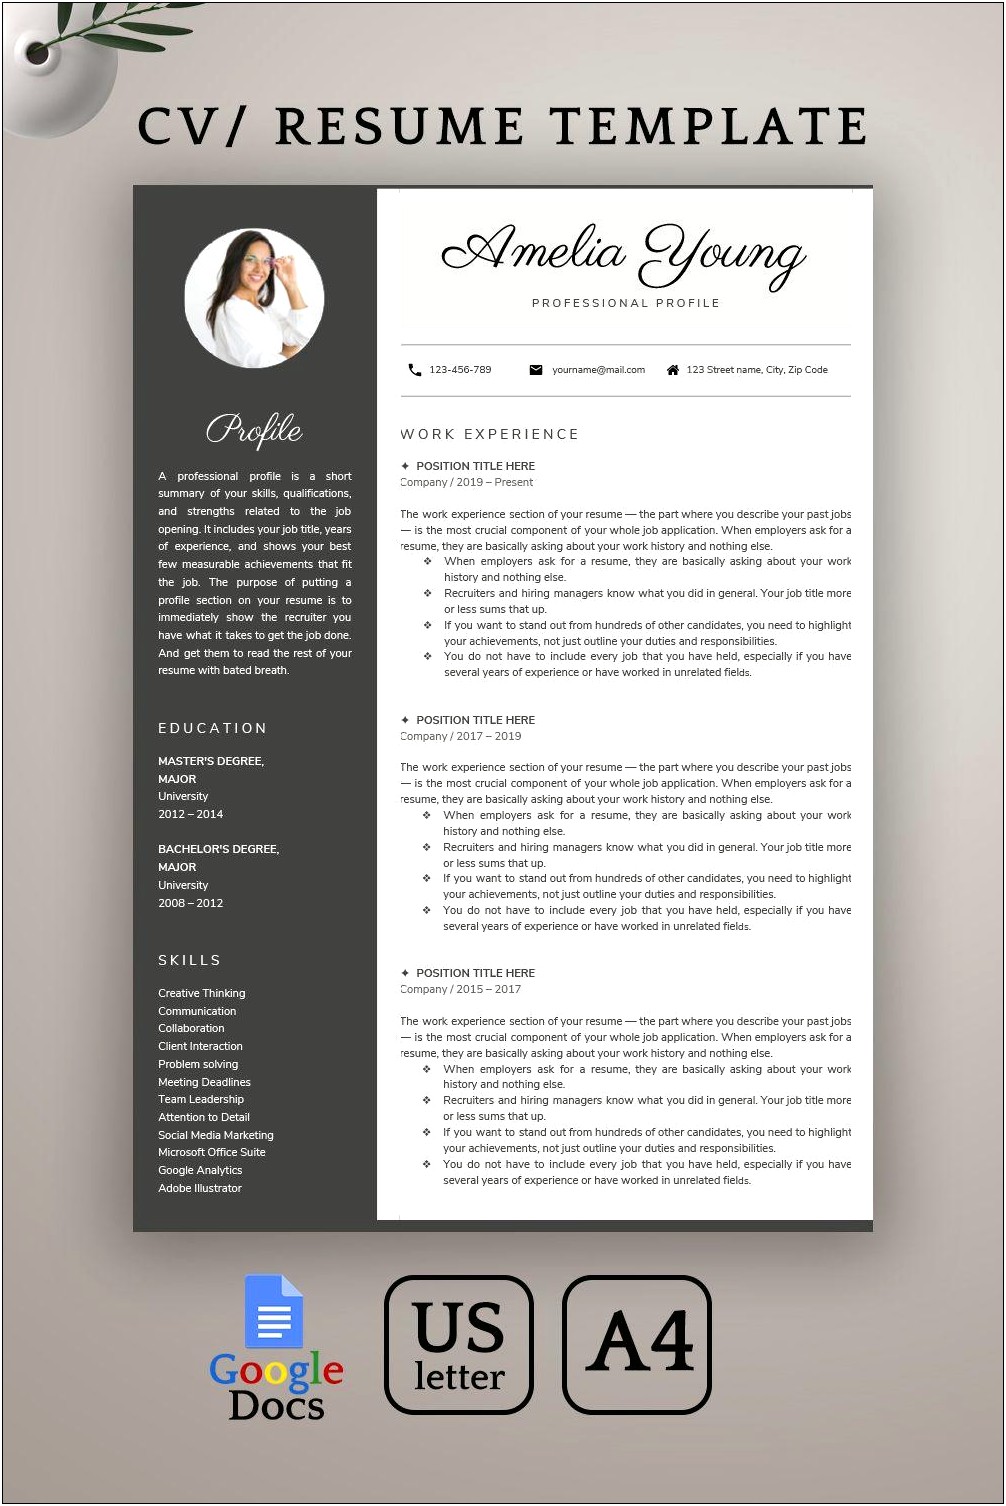 Using Resume Template In Google Docs Resume Example Gallery